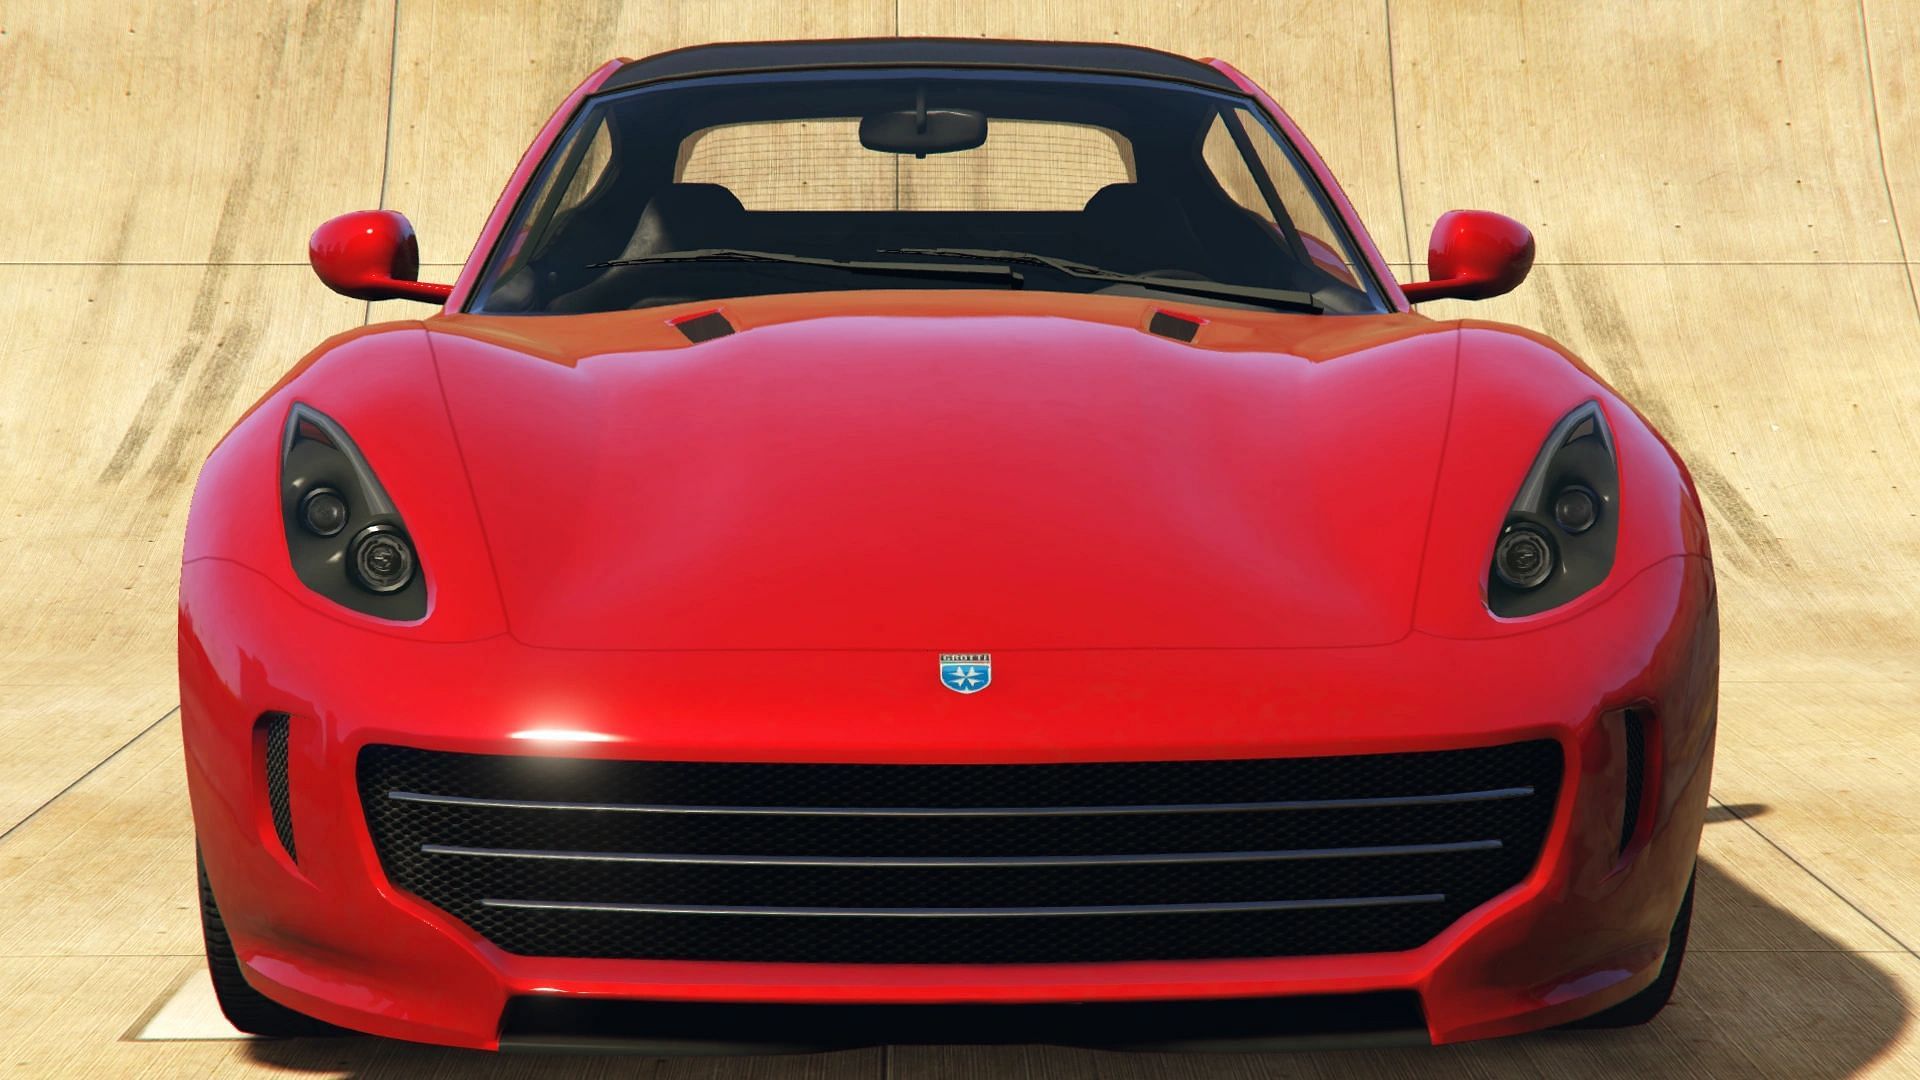 This car is a great pick in the game (Image via Monkeypolice188/GTA Wiki)